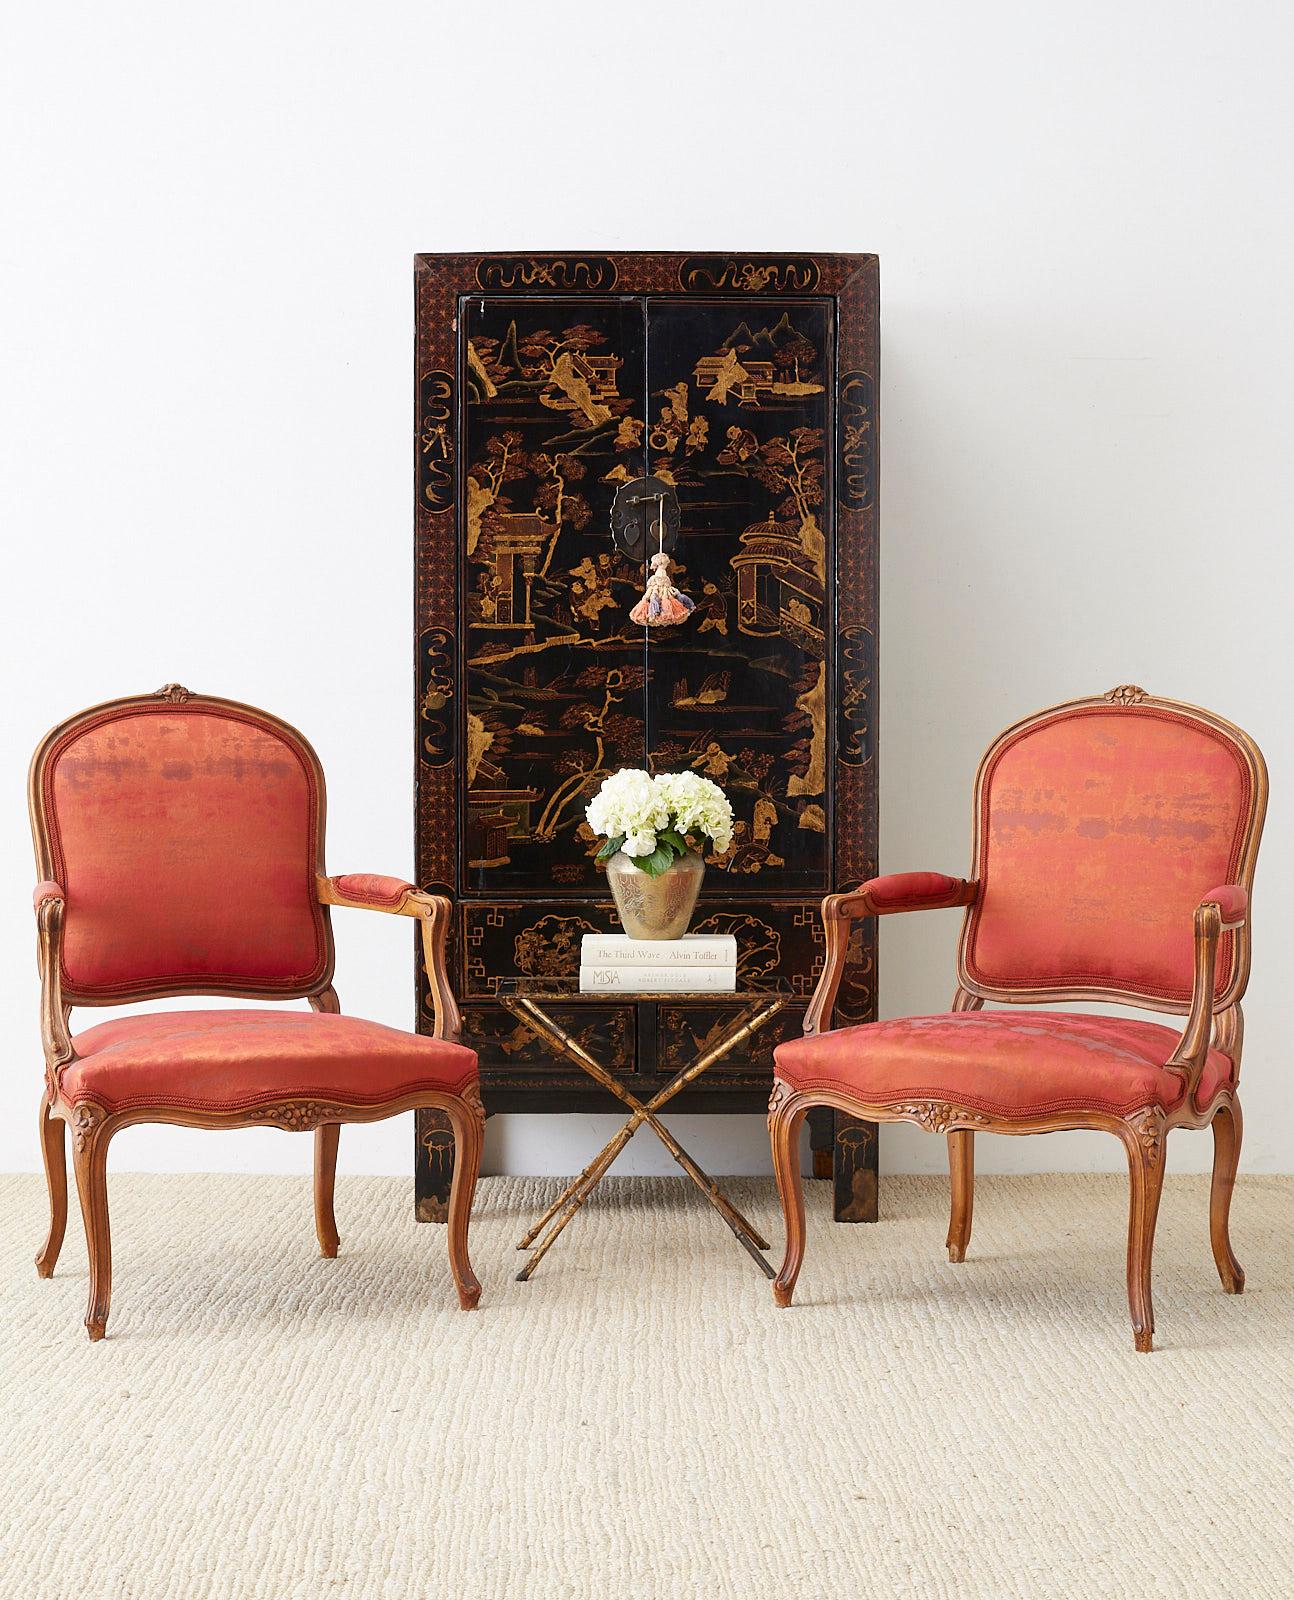 Fabulous pair of French carved walnut fauteuils made in the Louis XV style featuring a Chinese silk style upholstery with an antique look. Newly upholstered with a rich fabric that displays orange and red hues. The frame features a shaped back with